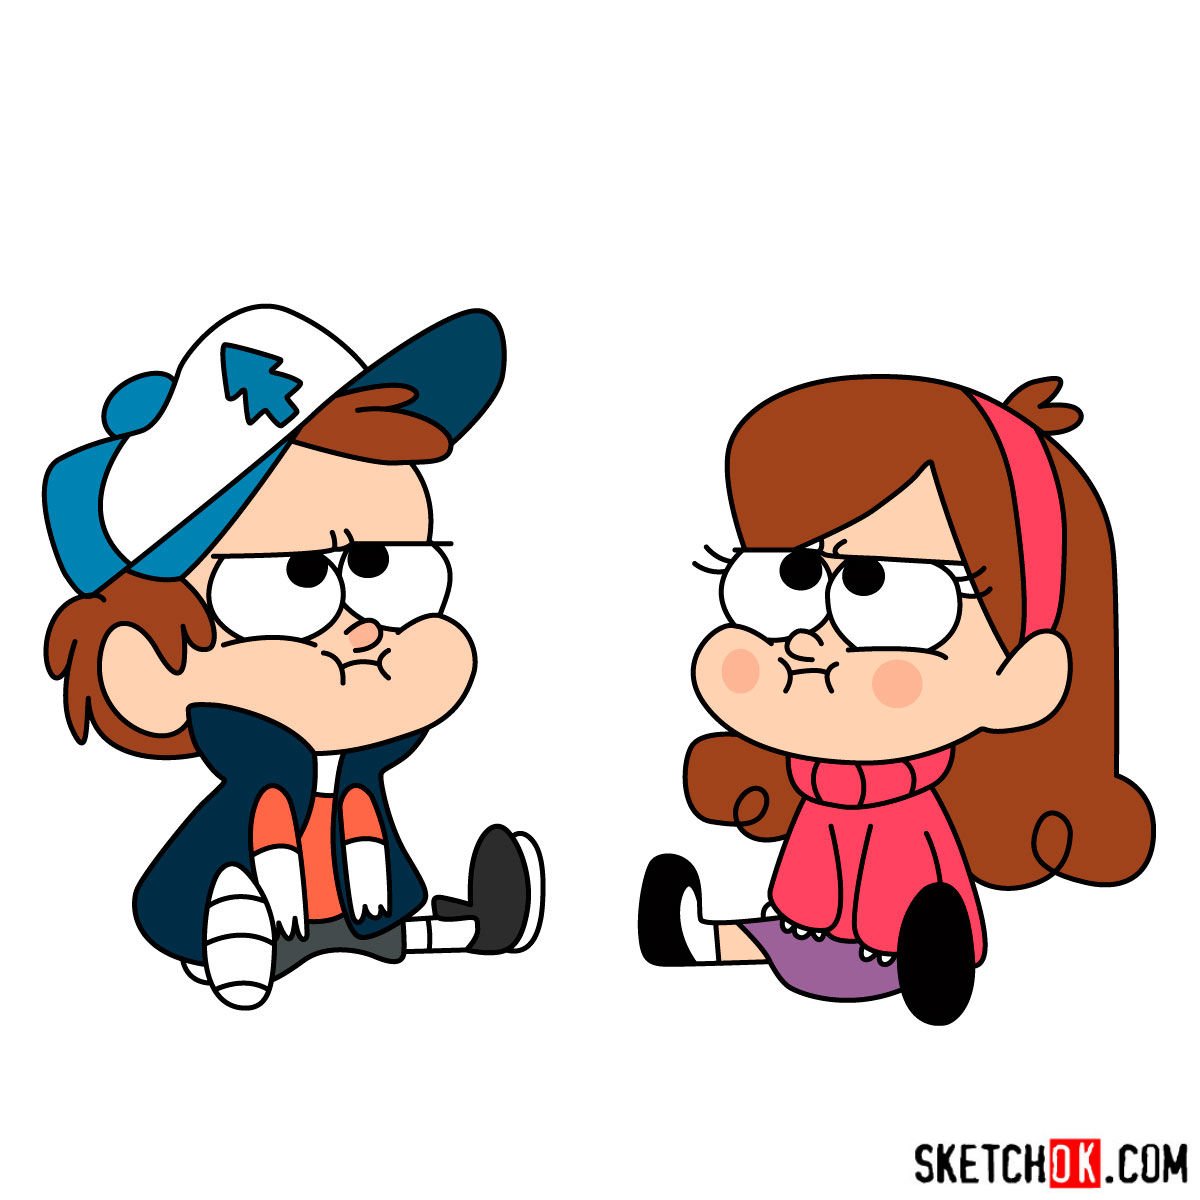 How to draw chibi Dipper and Mabel Pines